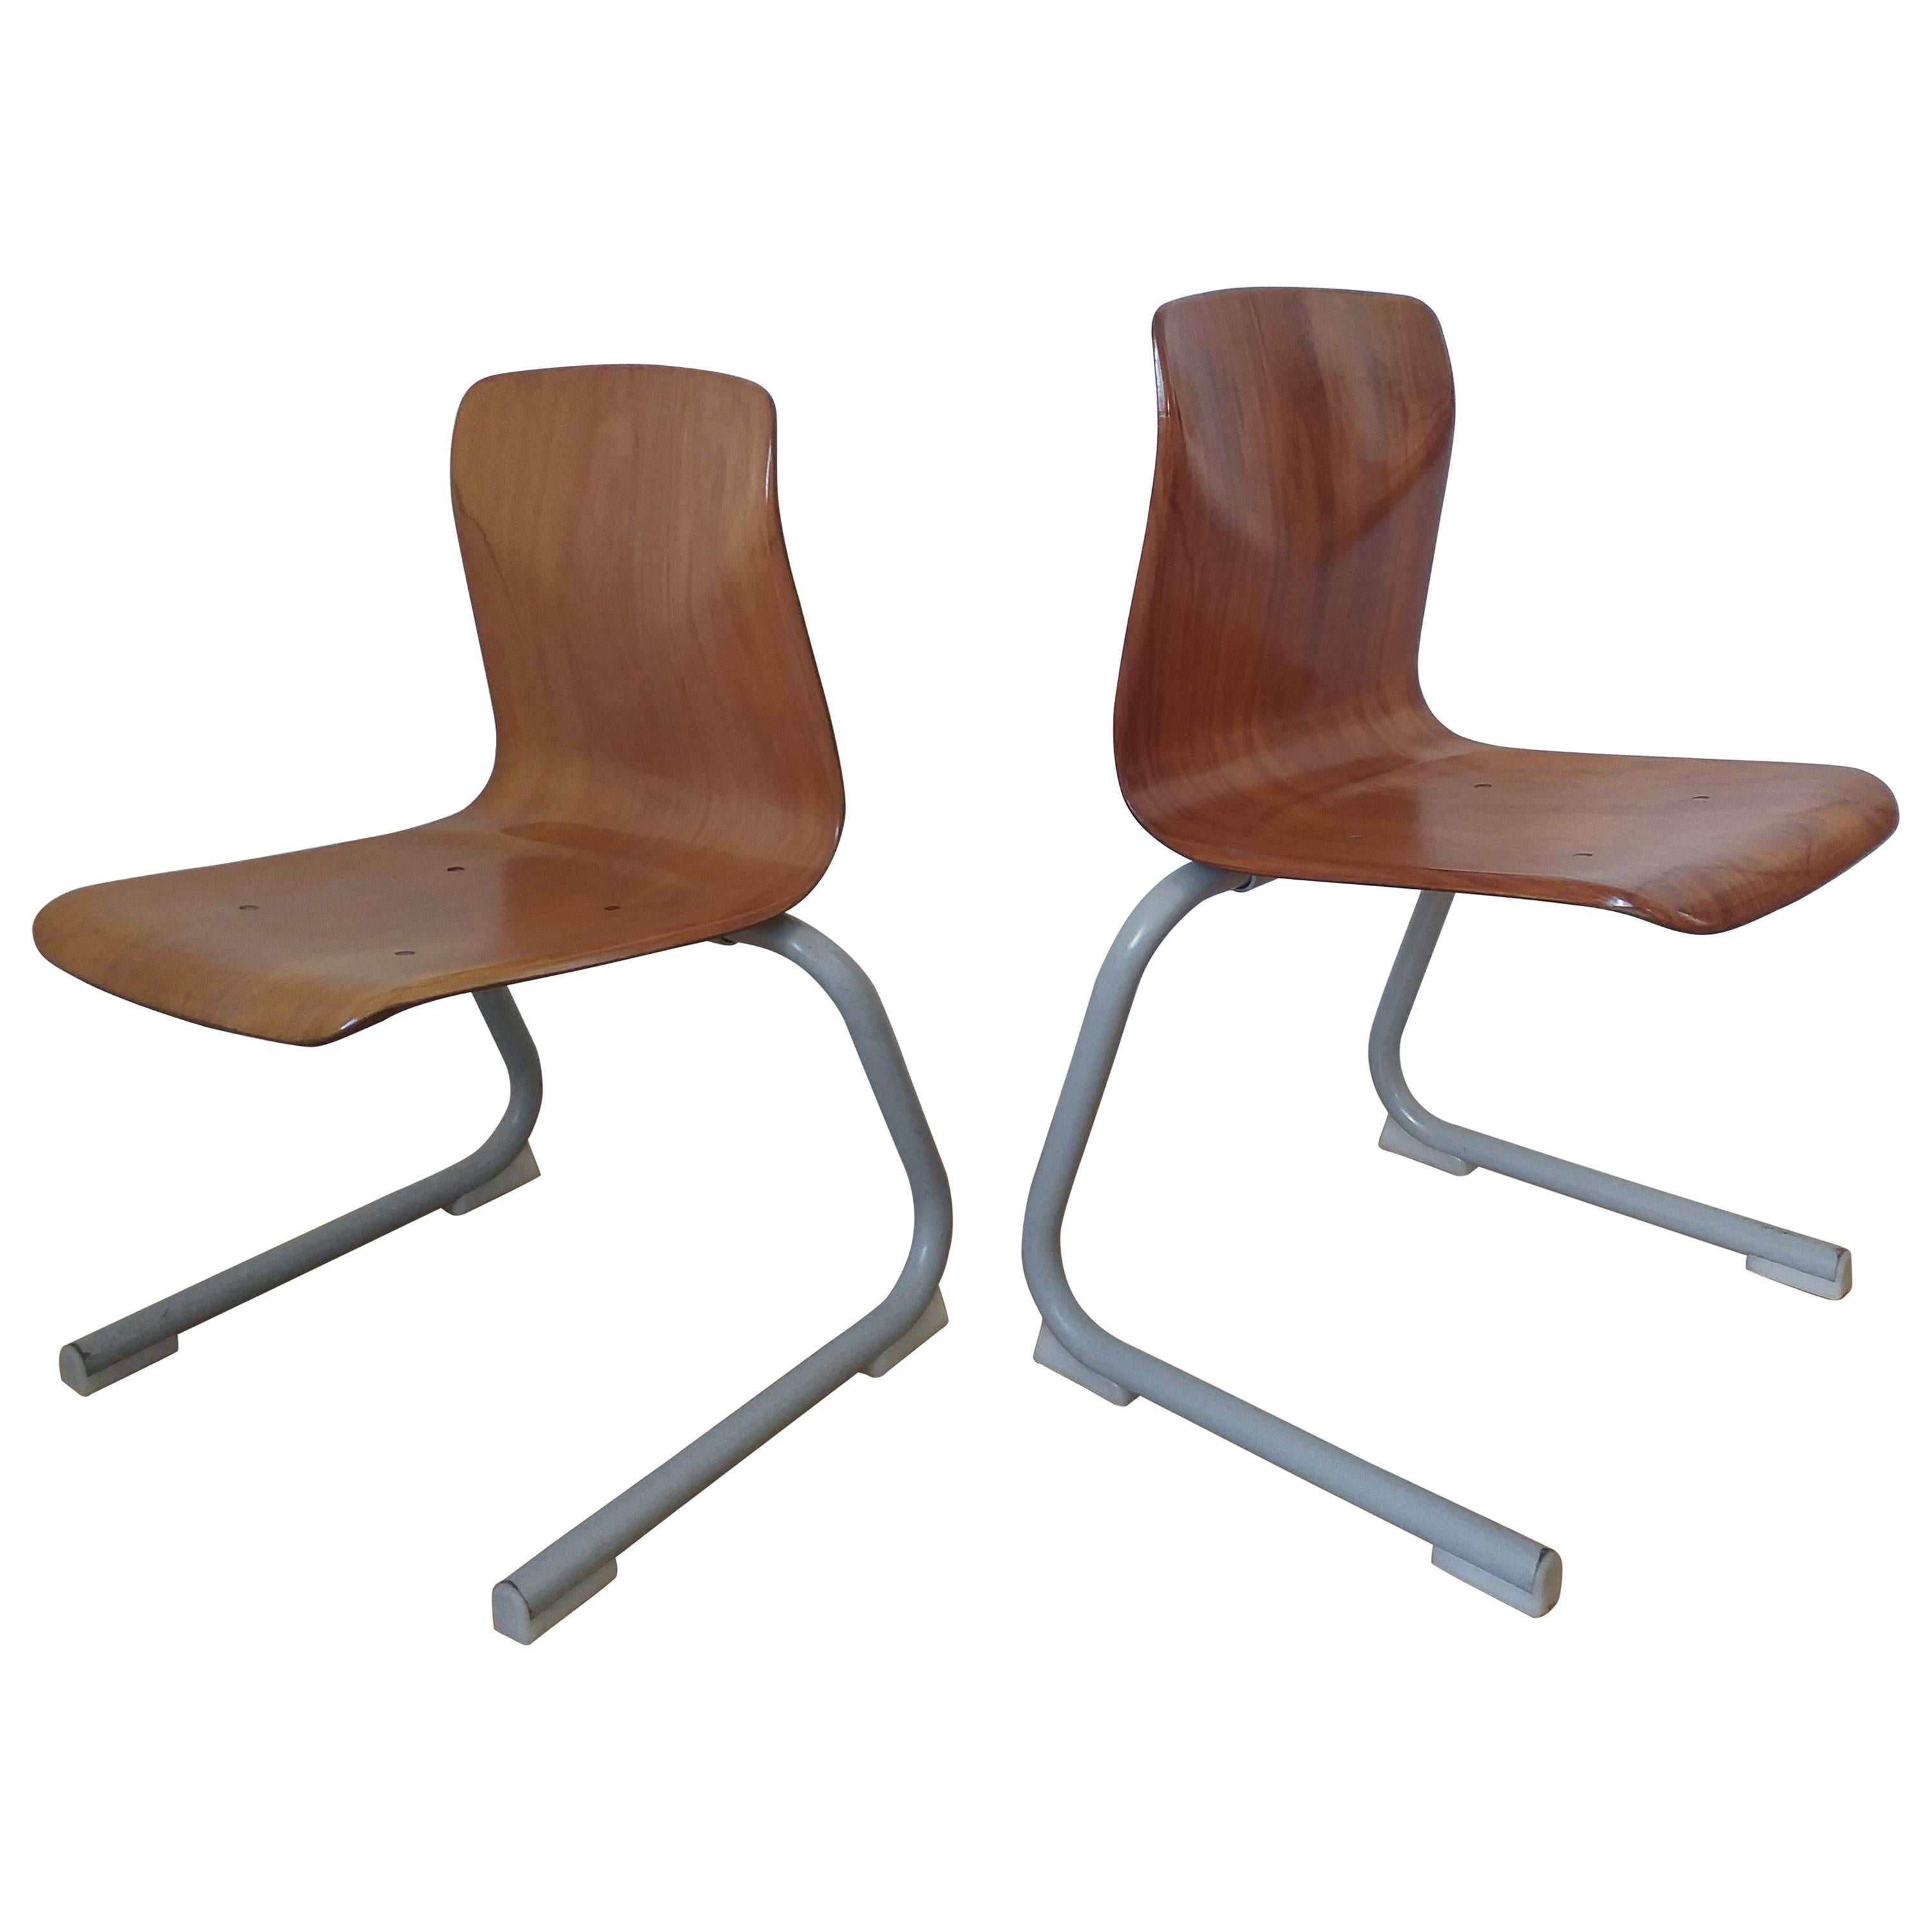 Pair of Midcentury Children / School Chairs Pagholz, Elmar Flötotto, 1980s For Sale